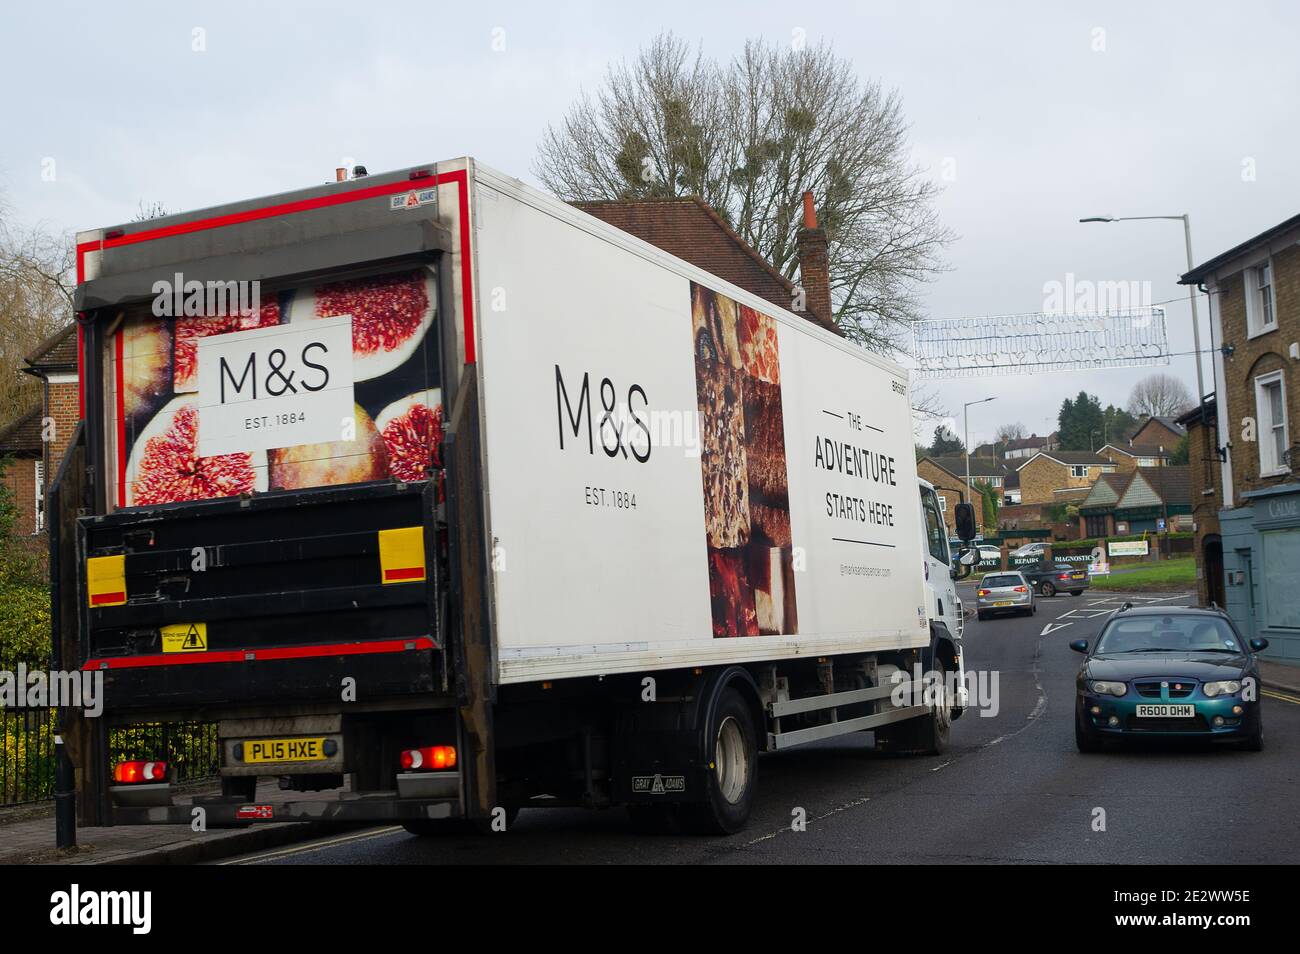 Chalfont St Peter, Buckinghamshire, UK. 15th January, 2021. An M&S lorry in the village of Chalfont St Peter. Some supermarkets are experiencing a shortage of fresh fruit and vegetables imported from the EU following Brexit. Credit: Maureen McLean/Alamy Stock Photo